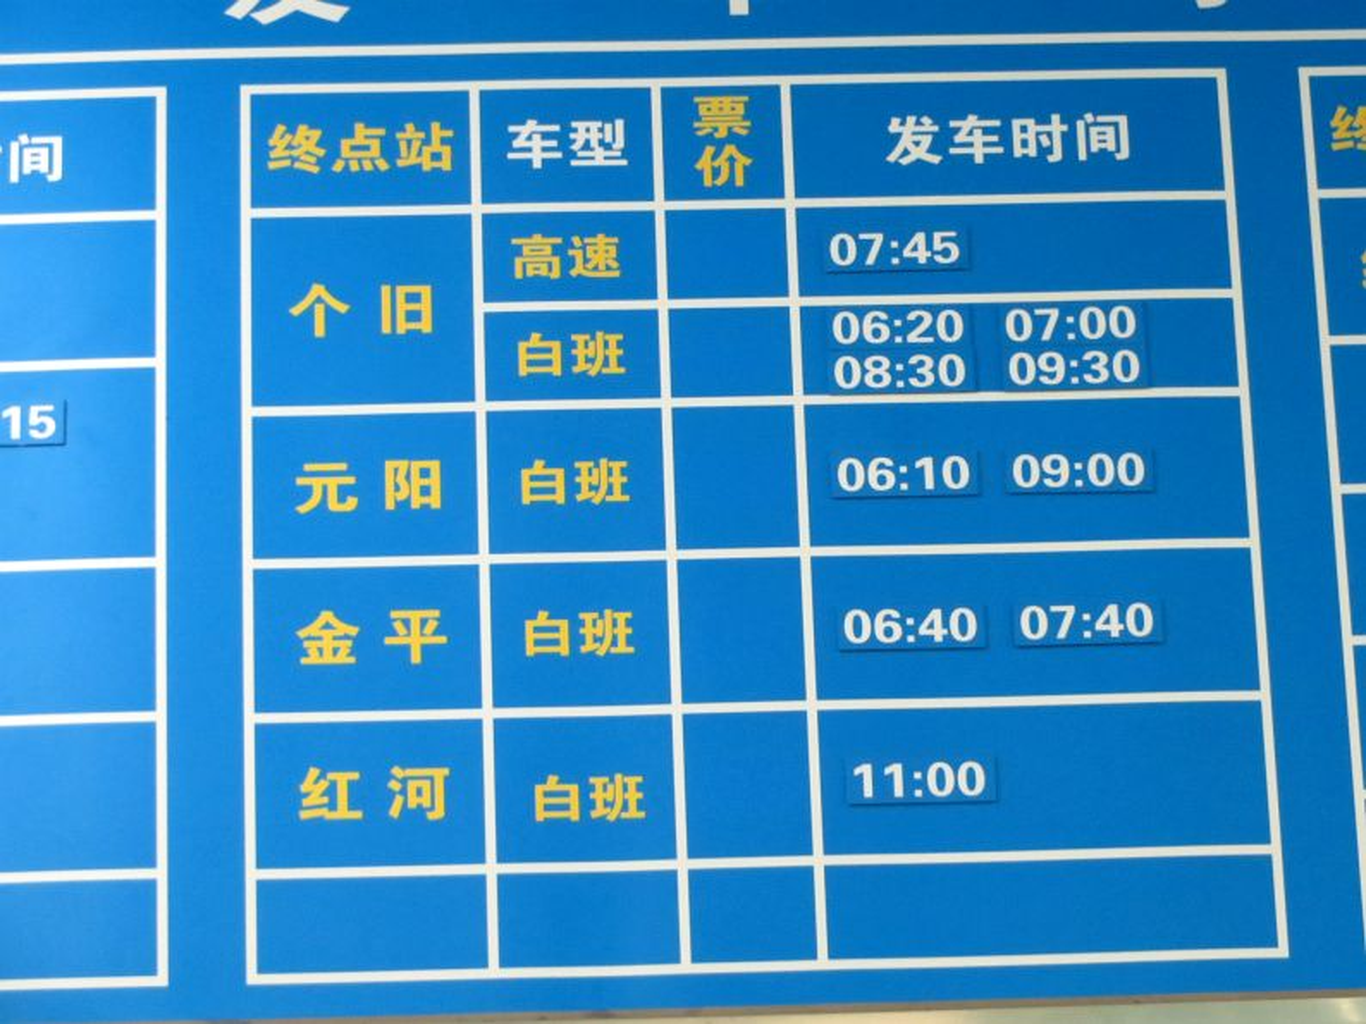 Picture: With the opening of the expressway to Mengzi Hekou is now much better connected with travel time to Kunming down to 8 hours. Busses go to Mengzi, Gejiu, Maguan, Wenshan, Jinping, Yuanyang, Jianshui and local destinations. 